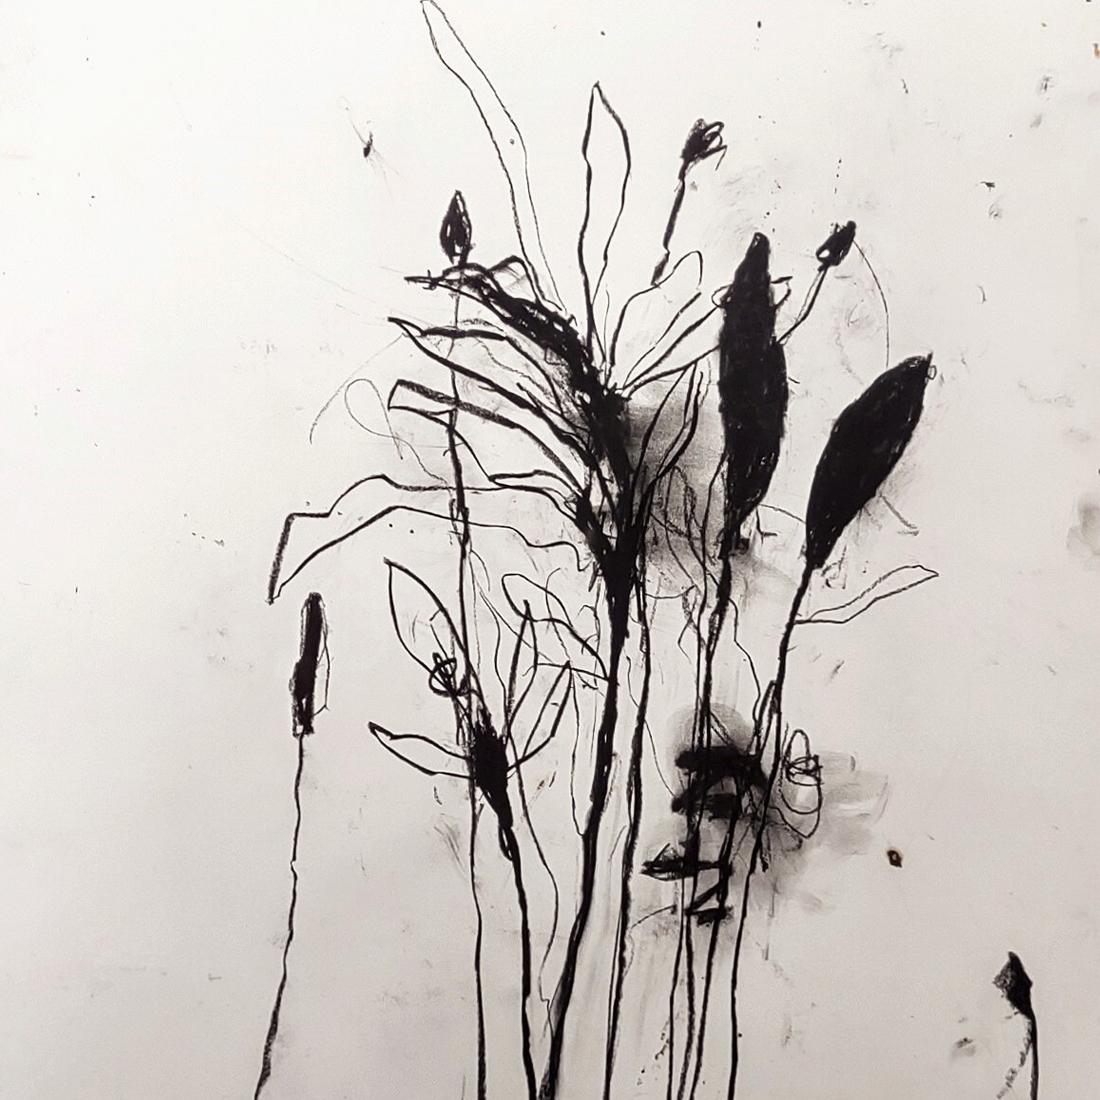 In the weeds ink bloom #6 (Abstract painting)

Charcoal & Oilstick on paper - Unframed.

Baribeau constructs his paintings layer upon layer, building color, form and texture into viscous, impasto compositions, on supports that are themselves often